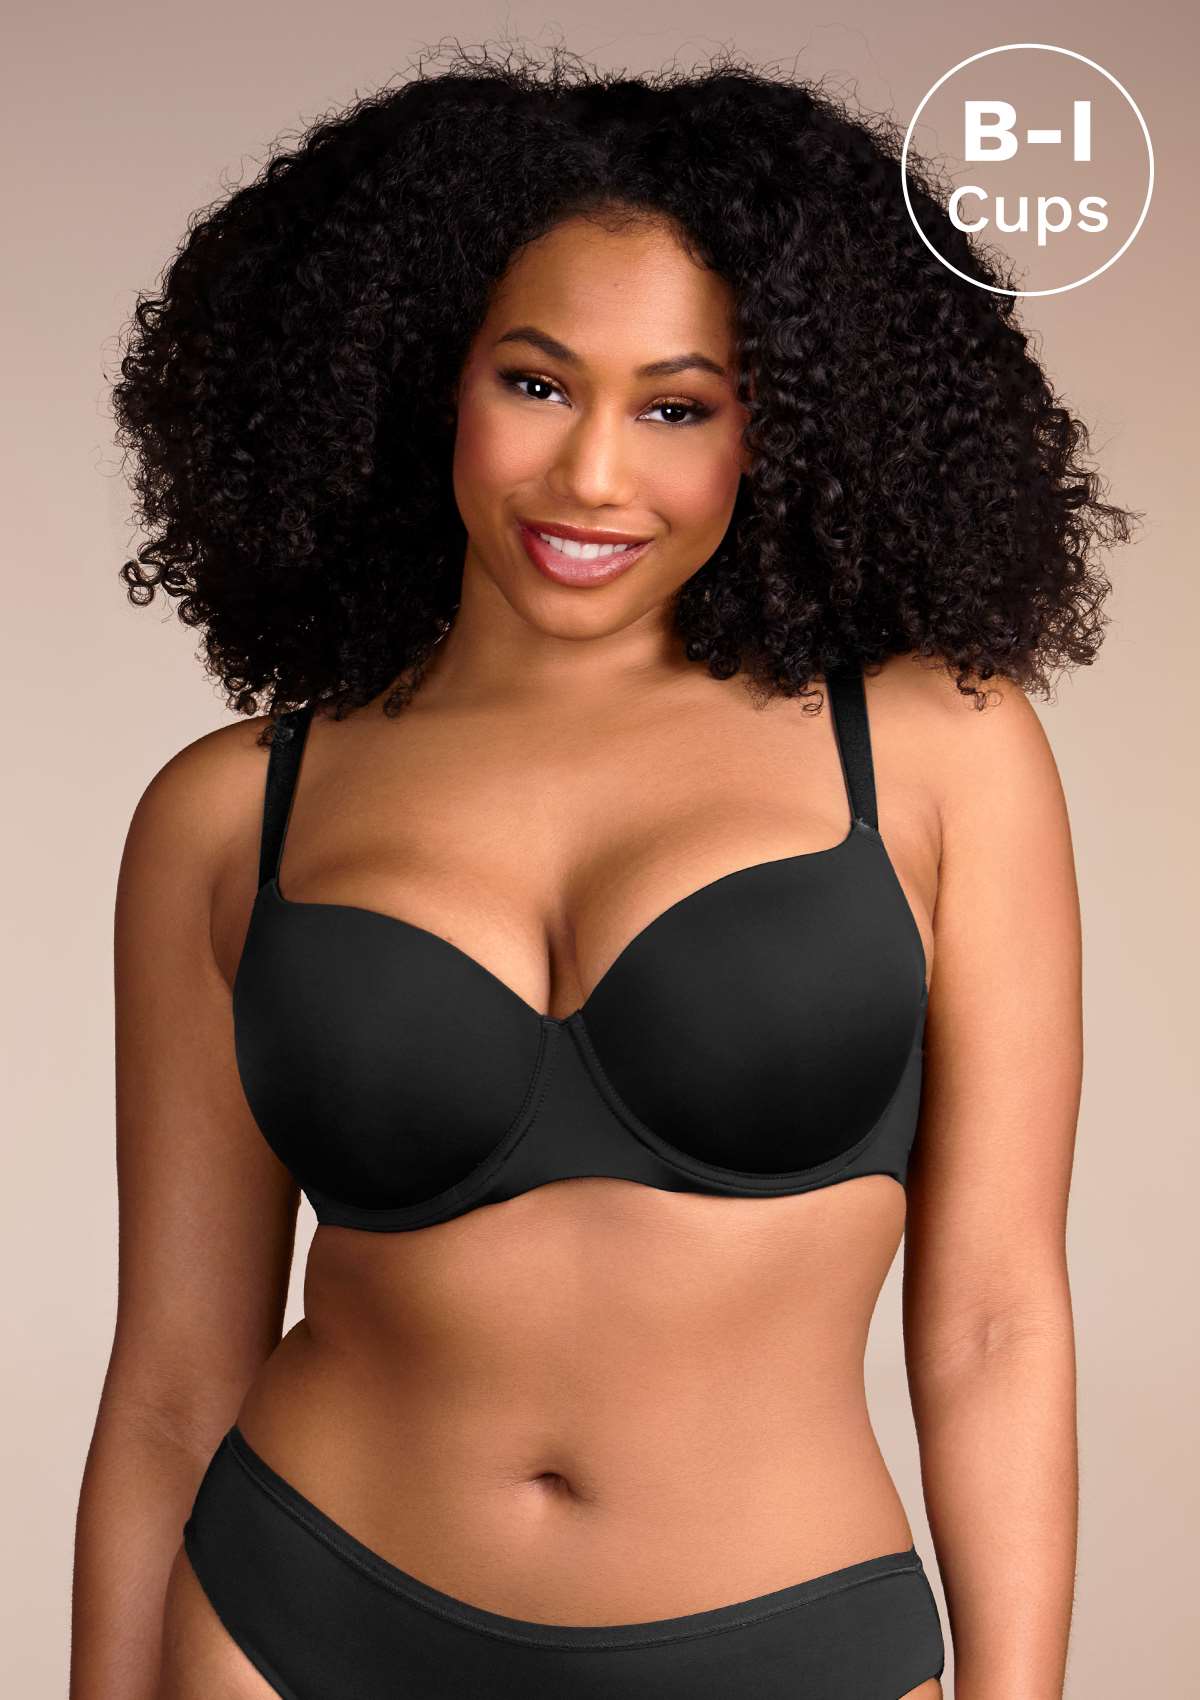 HSIA Gemma Smooth Padded T-shirt Everyday Bras - For Lift And Comfort - Black / 40 / D